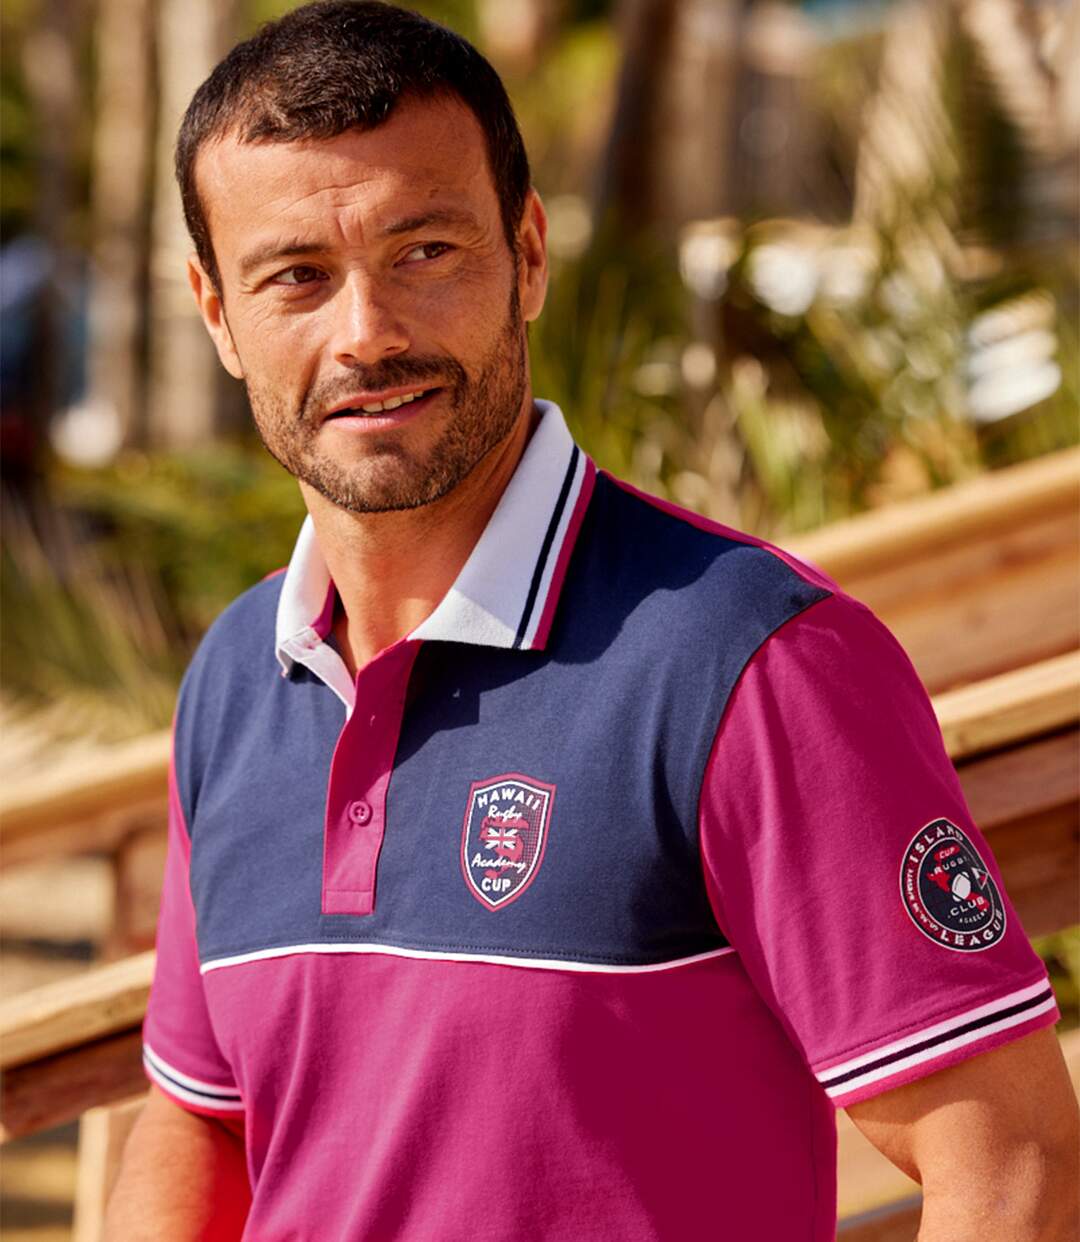 Polo Rugby Atlas For Men